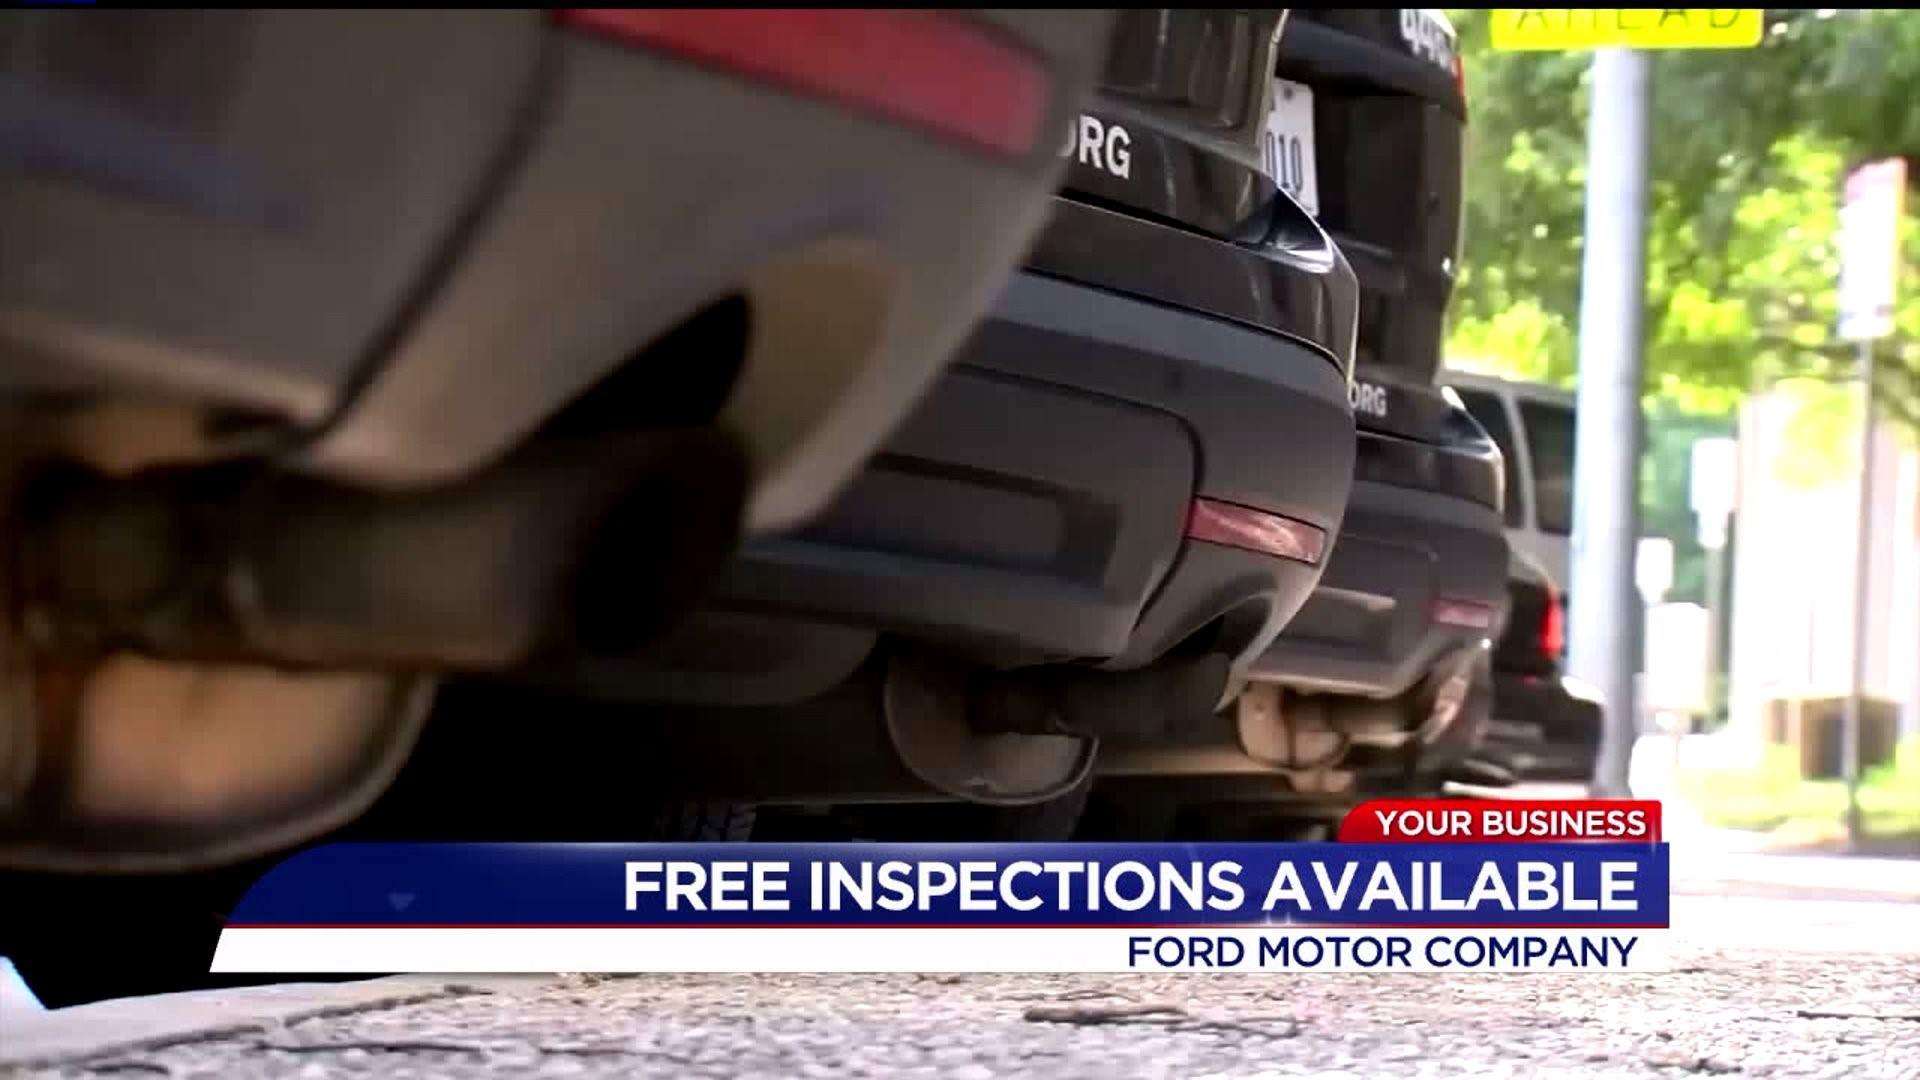 Free inspections available for Ford vehicle owners